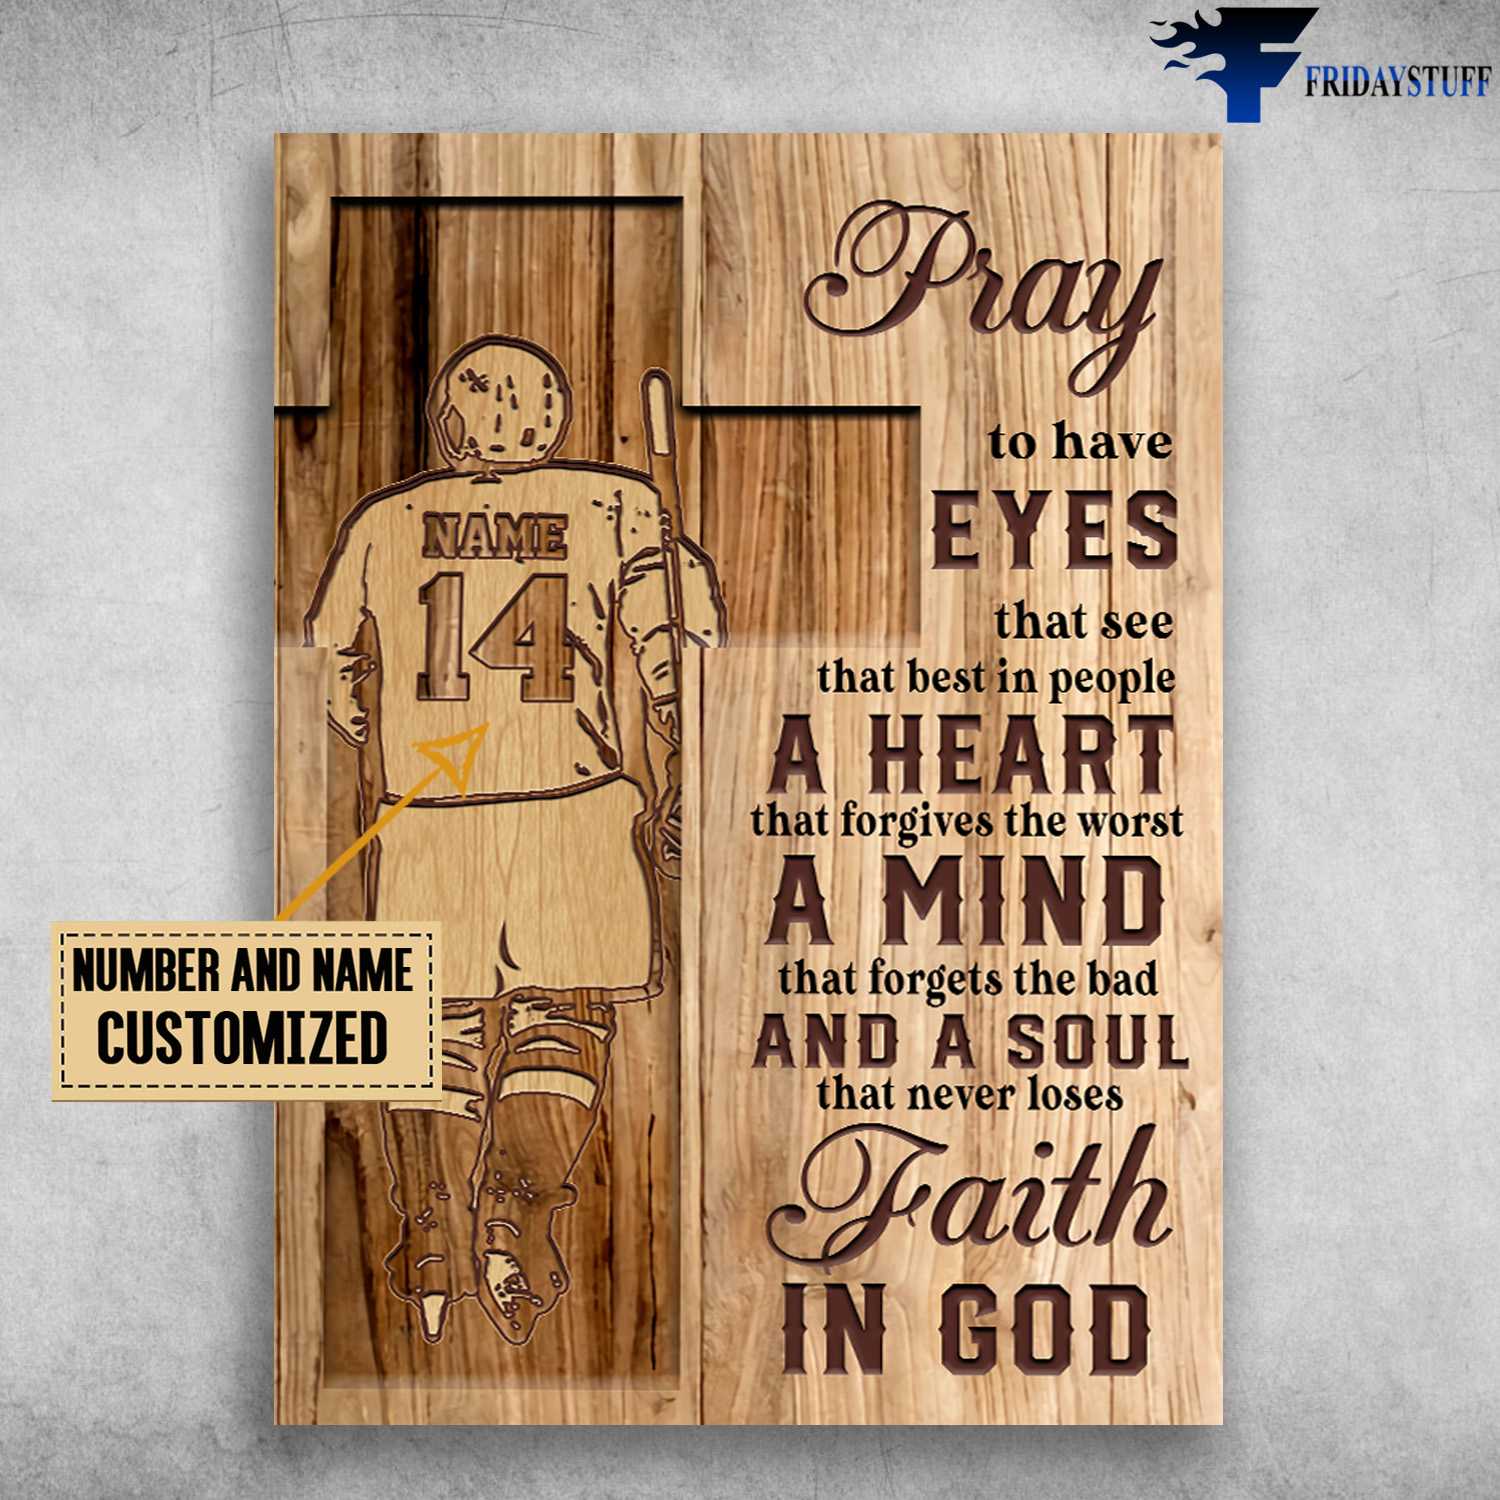 Hockey Player, Pray To Have Eyes That See, That Best In People, A Heart That Forgives The Worst, A Mind That Forgets The Bad, And A Soul That Never Loses, Faith In God